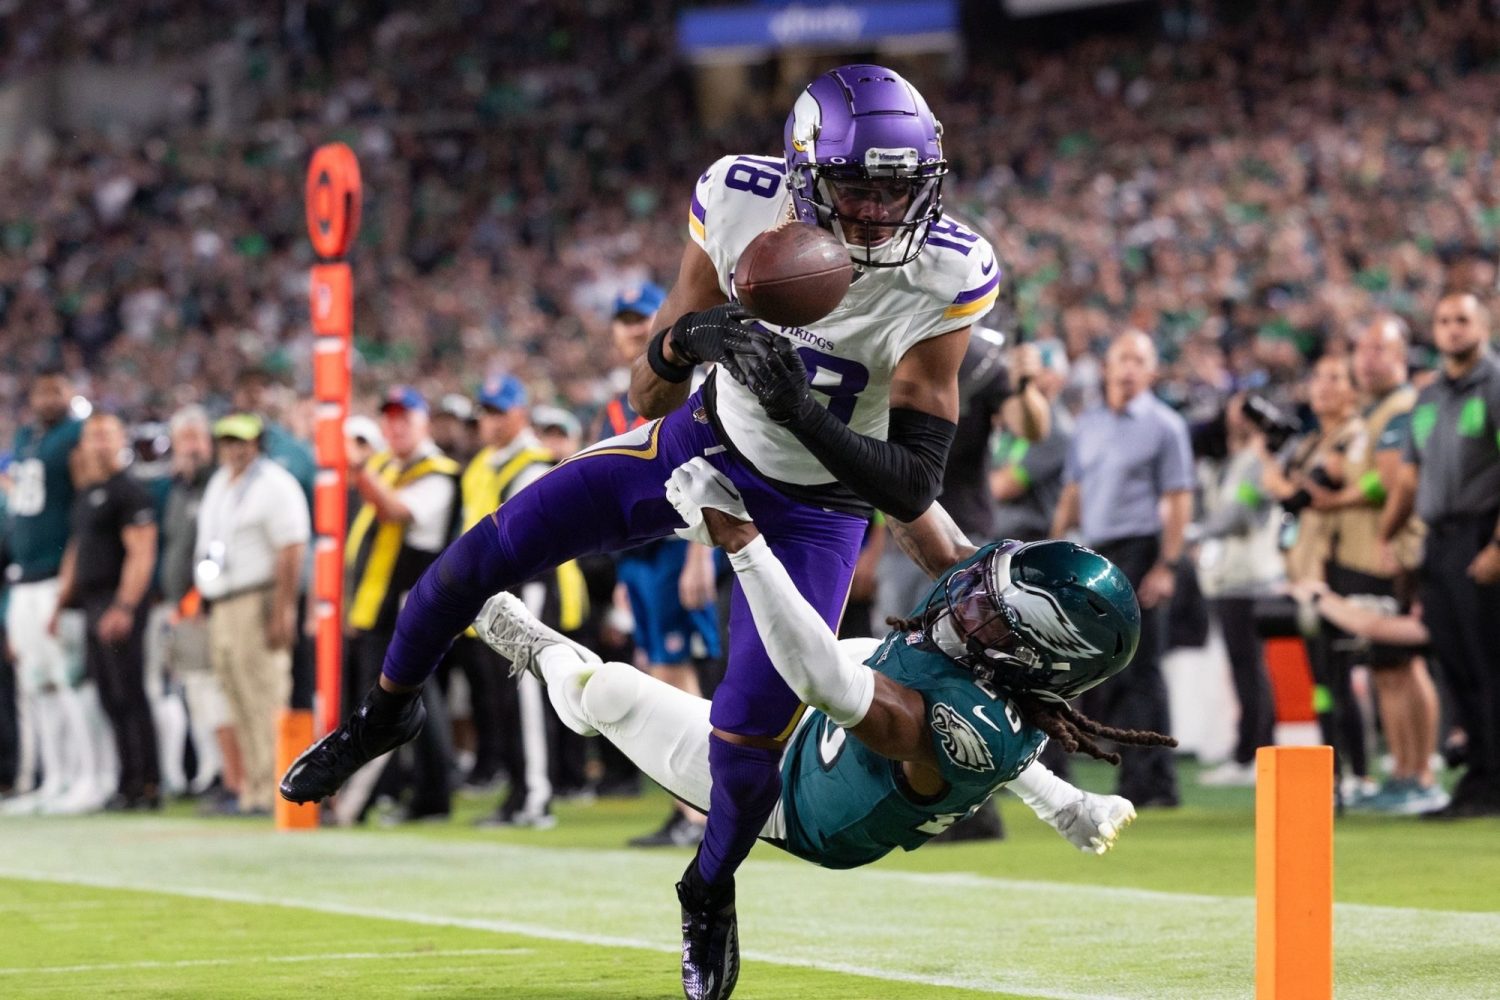 Minnesota Vikings wide receiver Justin Jefferson fumbles the ball out of bounds in the end zone while being tackled by Philadelphia Eagles safety Terrell Edmunds during the second quarter at Lincoln Financial Field.